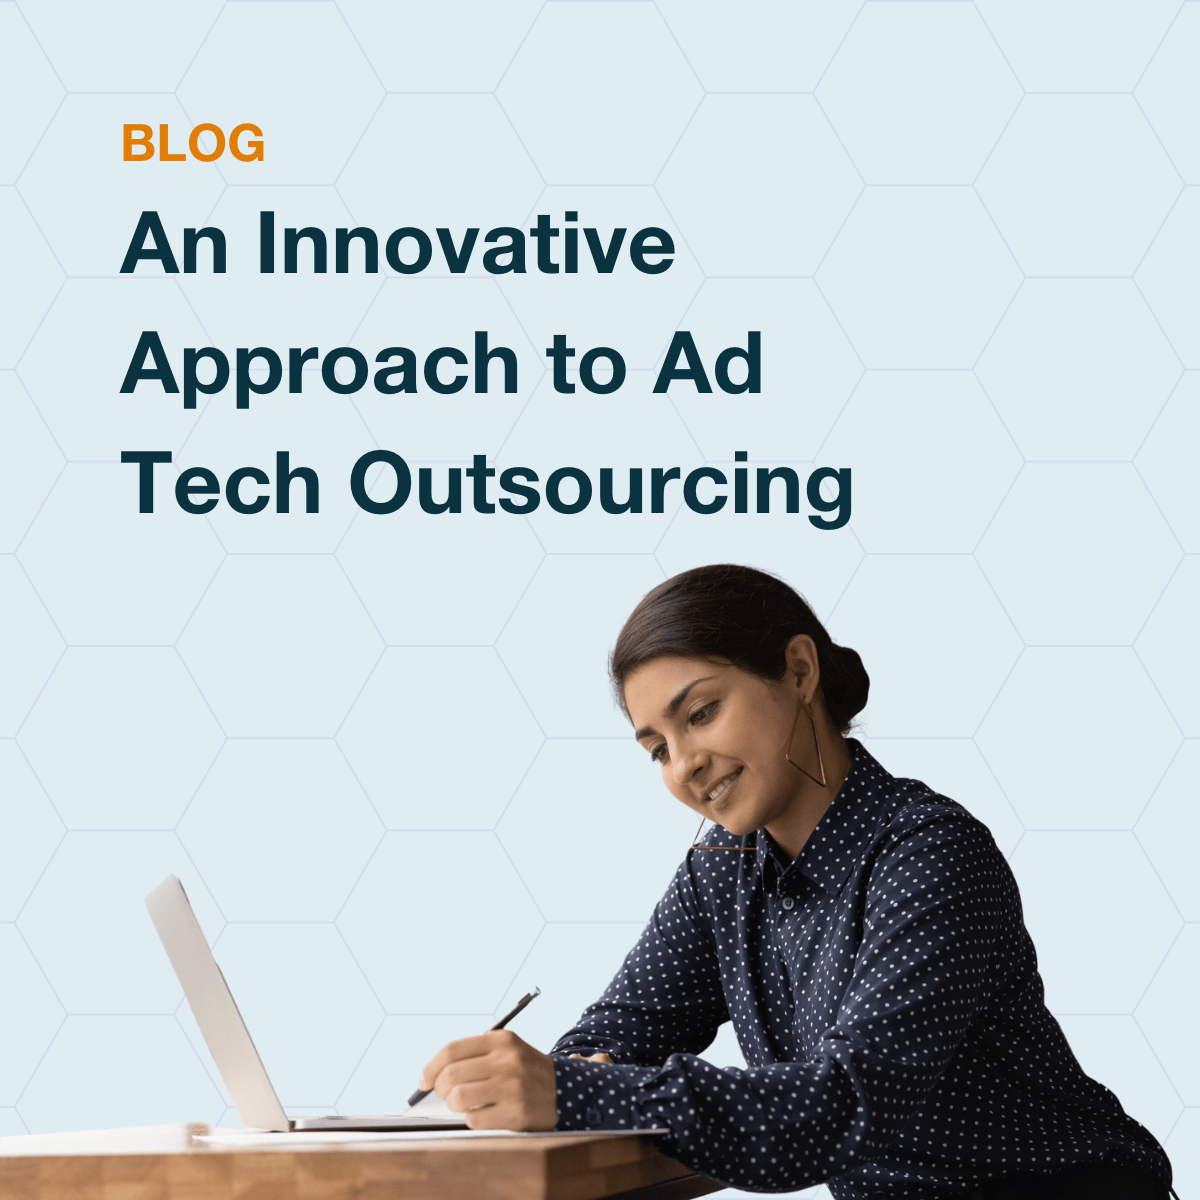 An Innovative Approach to AdTech Outsourcing